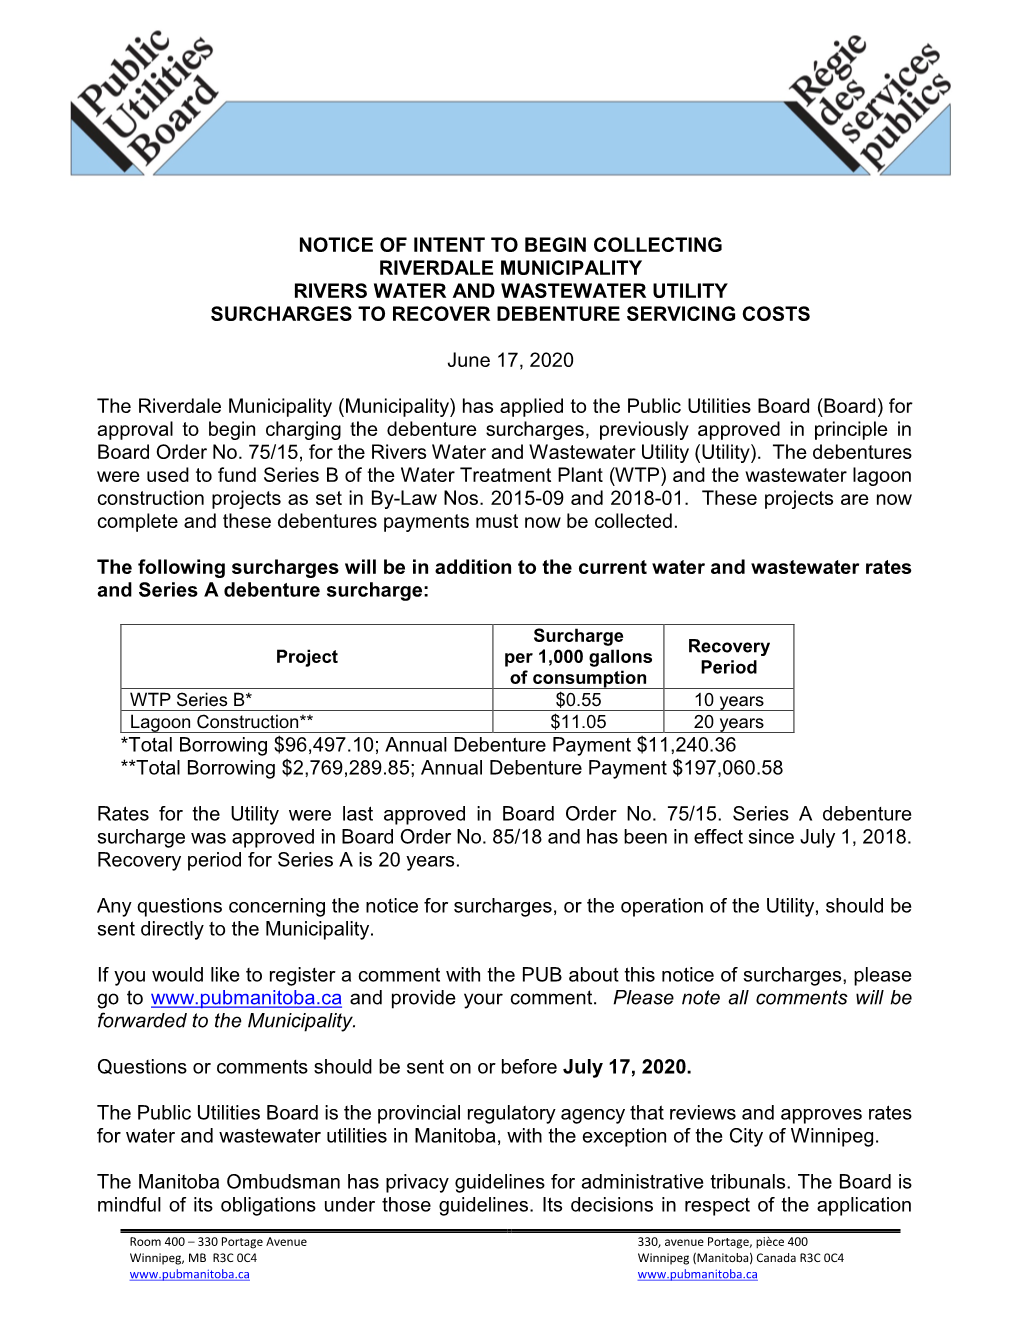 Notice of Intent to Begin Collecting Riverdale Municipality Rivers Water and Wastewater Utility Surcharges to Recover Debenture Servicing Costs